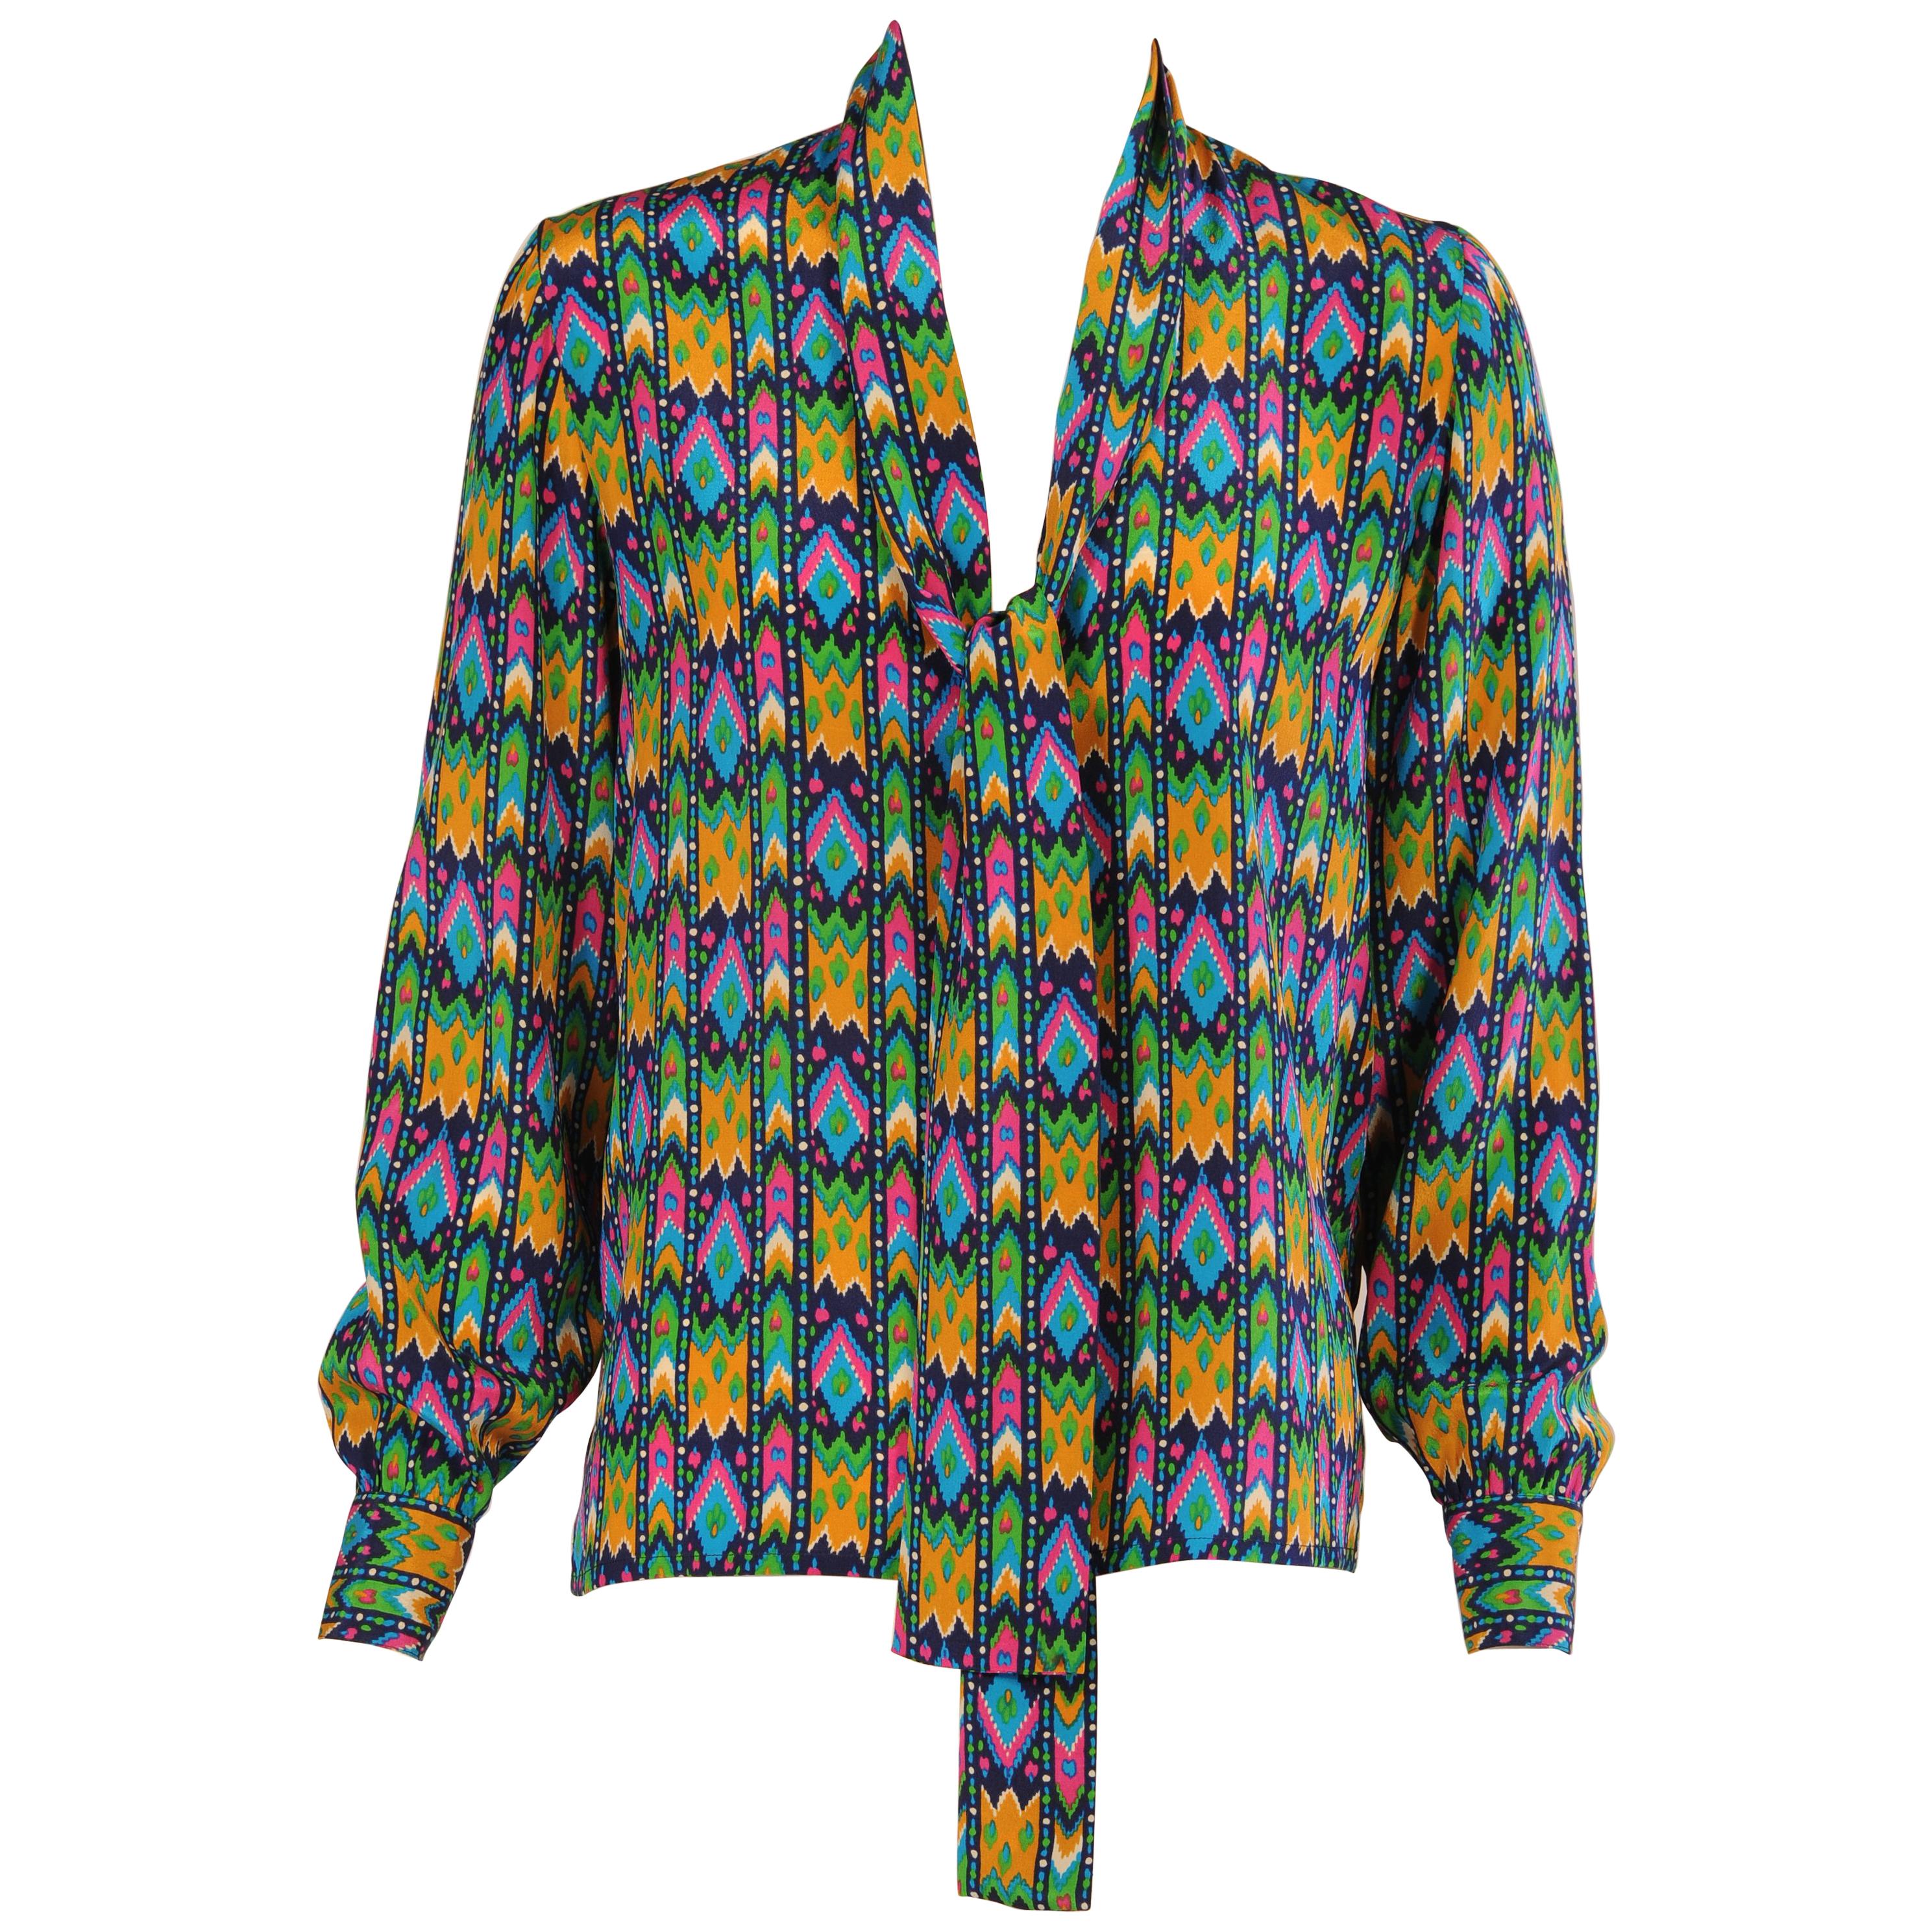 Yves Saint Laurent Colorful Silk Print Tunic Blouse with Tie Collar